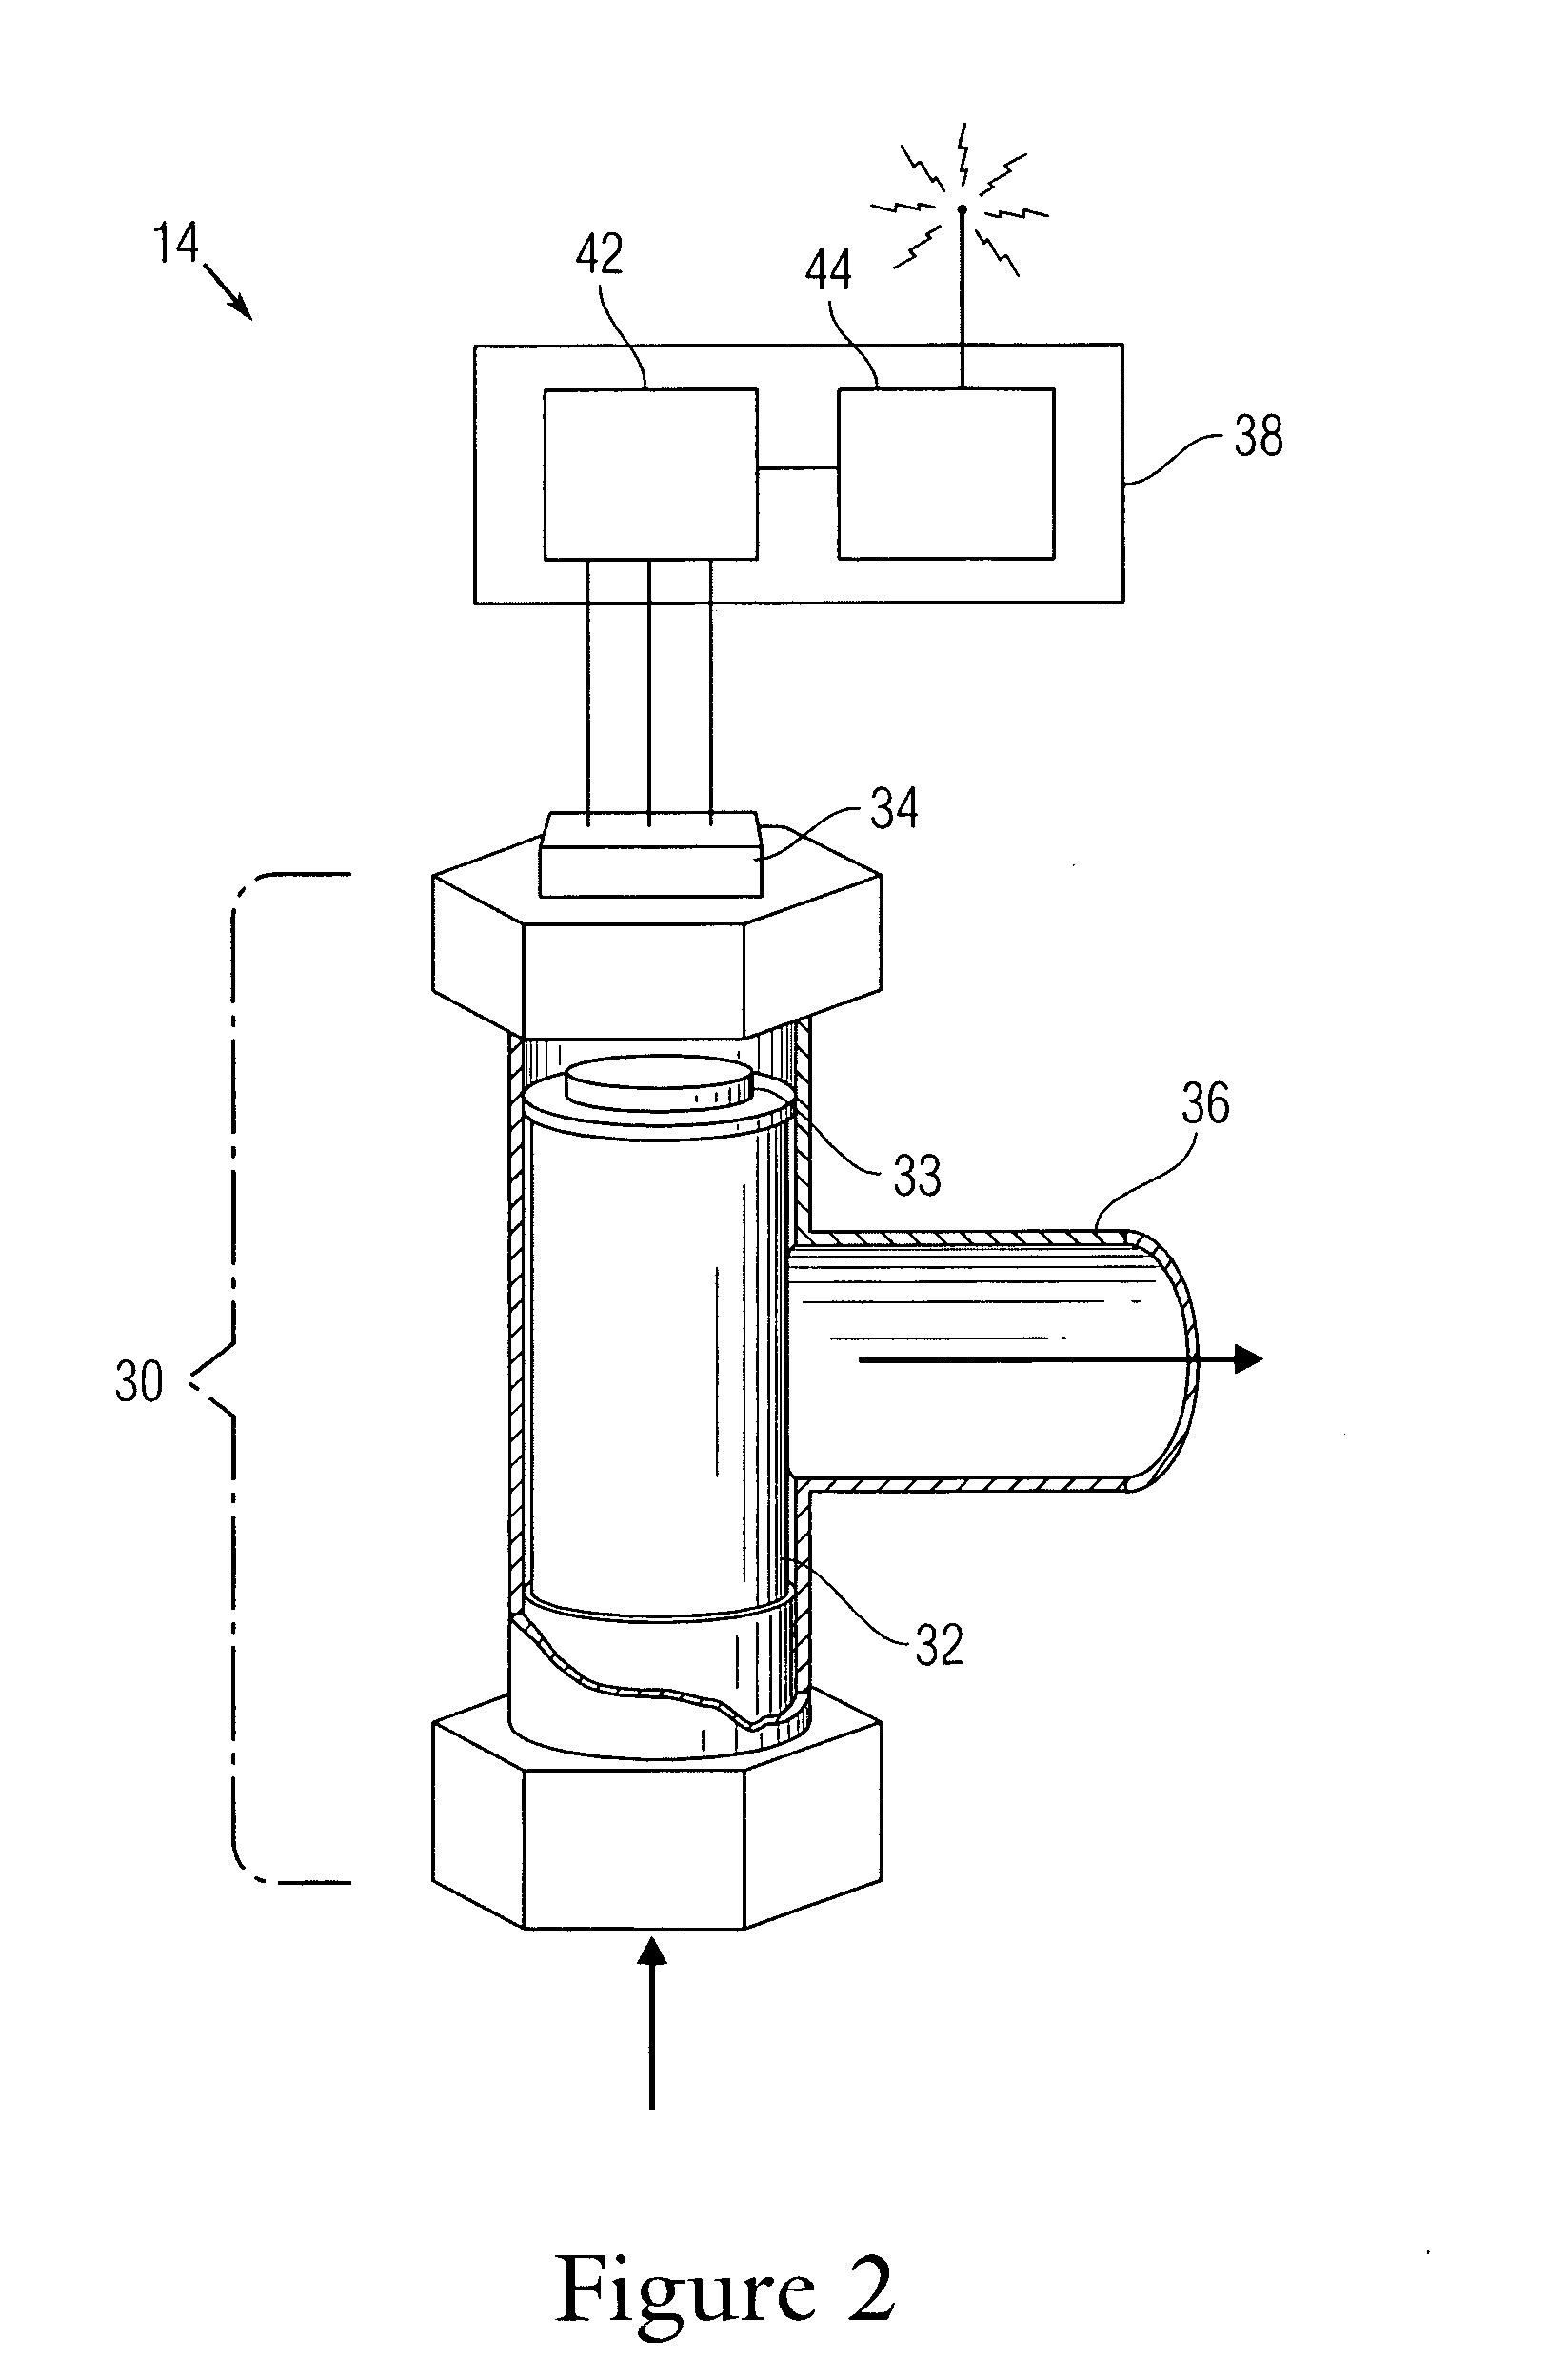 Wireless water flow monitoring and leak detection system, and method